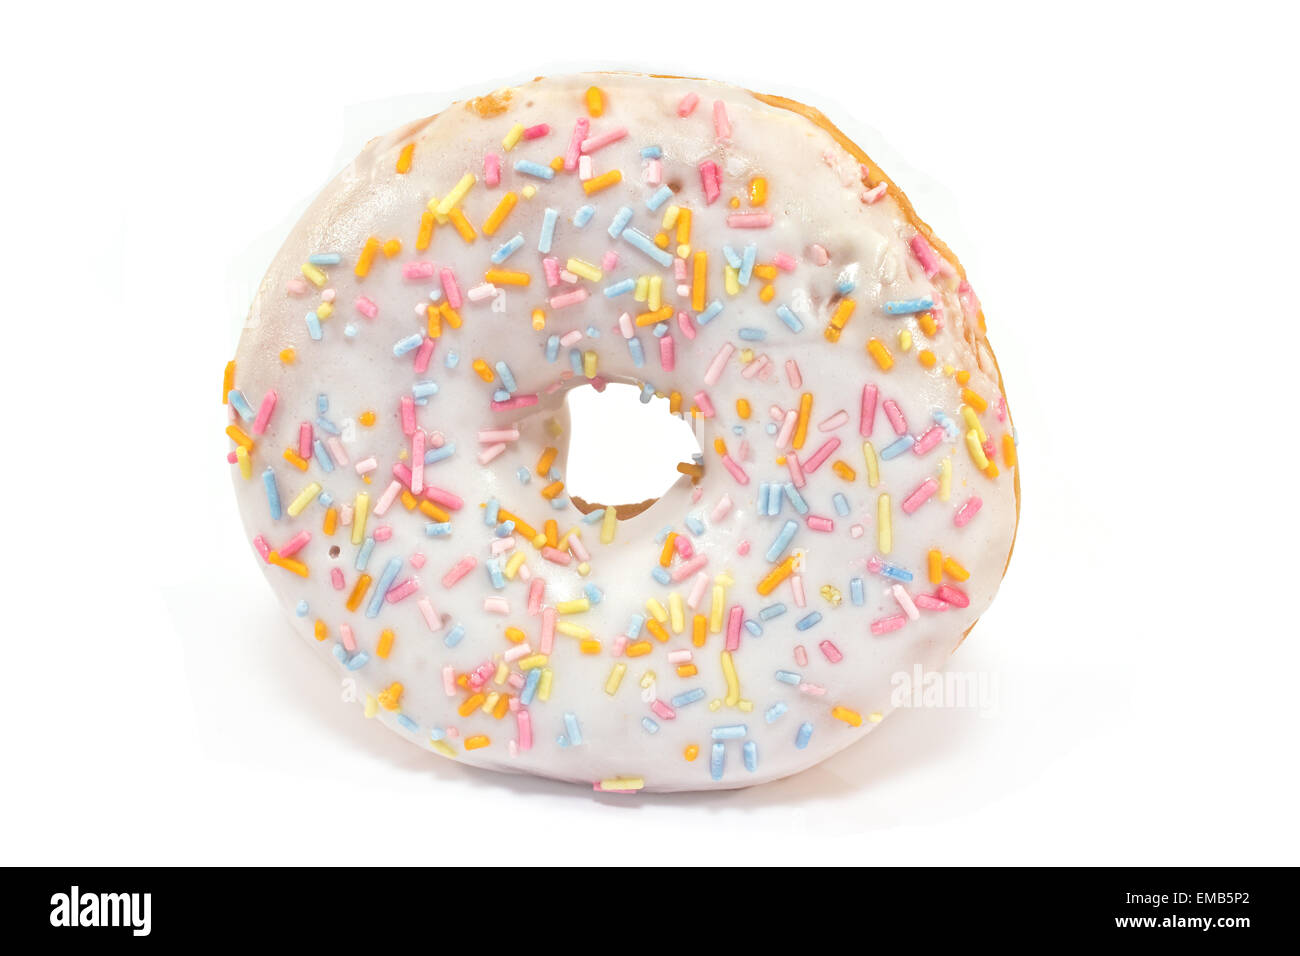 Donut with sprinkles isolated on white Stock Photo